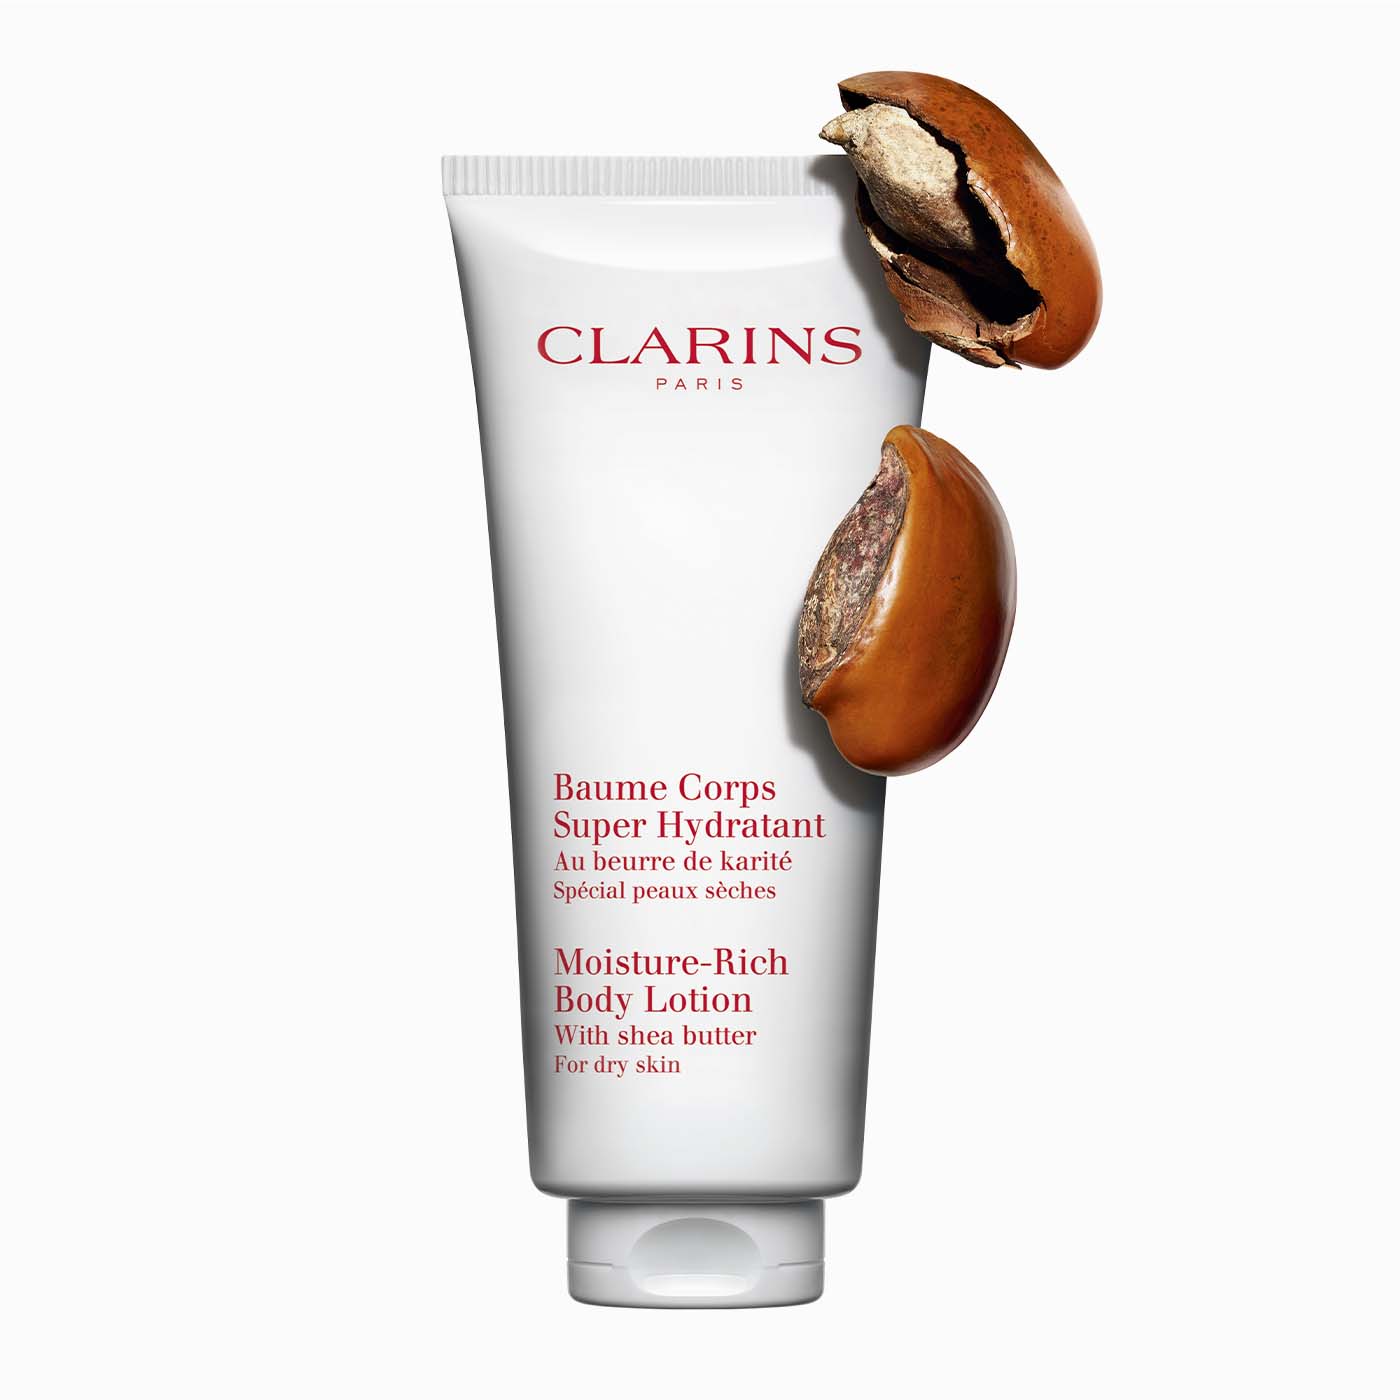 Moisture-Rich Body Lotion | Non-Greasy Luxury Lotion | CLARINS®